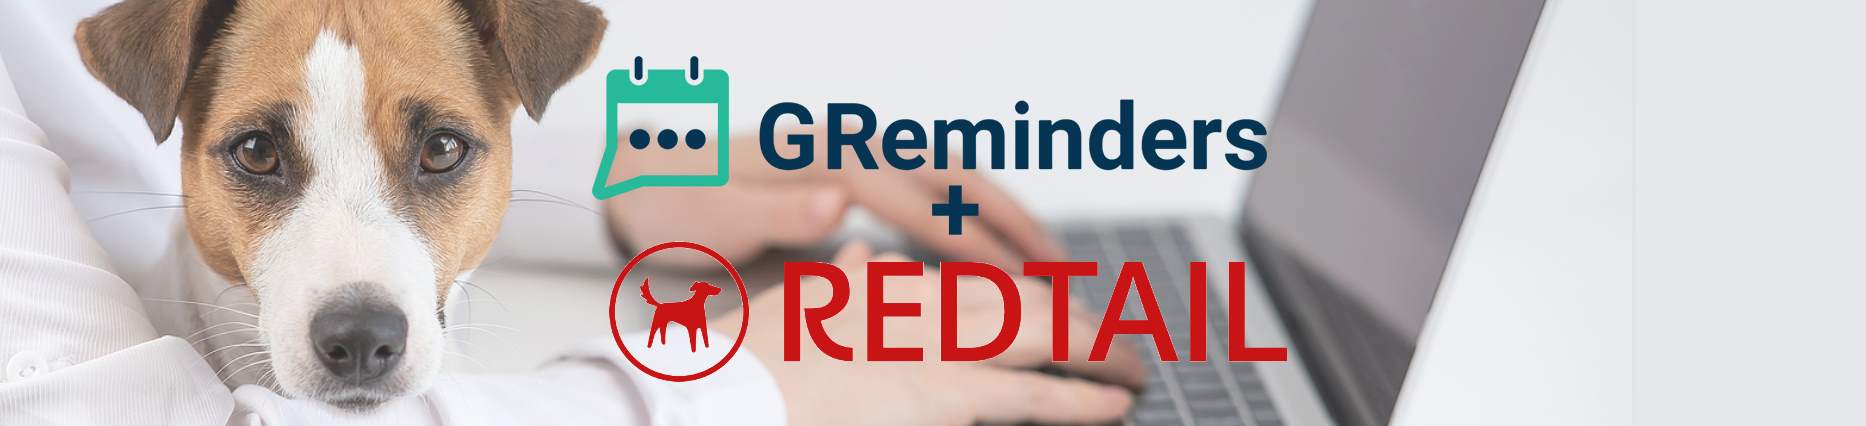 Redtail Text Reminders for Appointments and Automated Client Scheduling